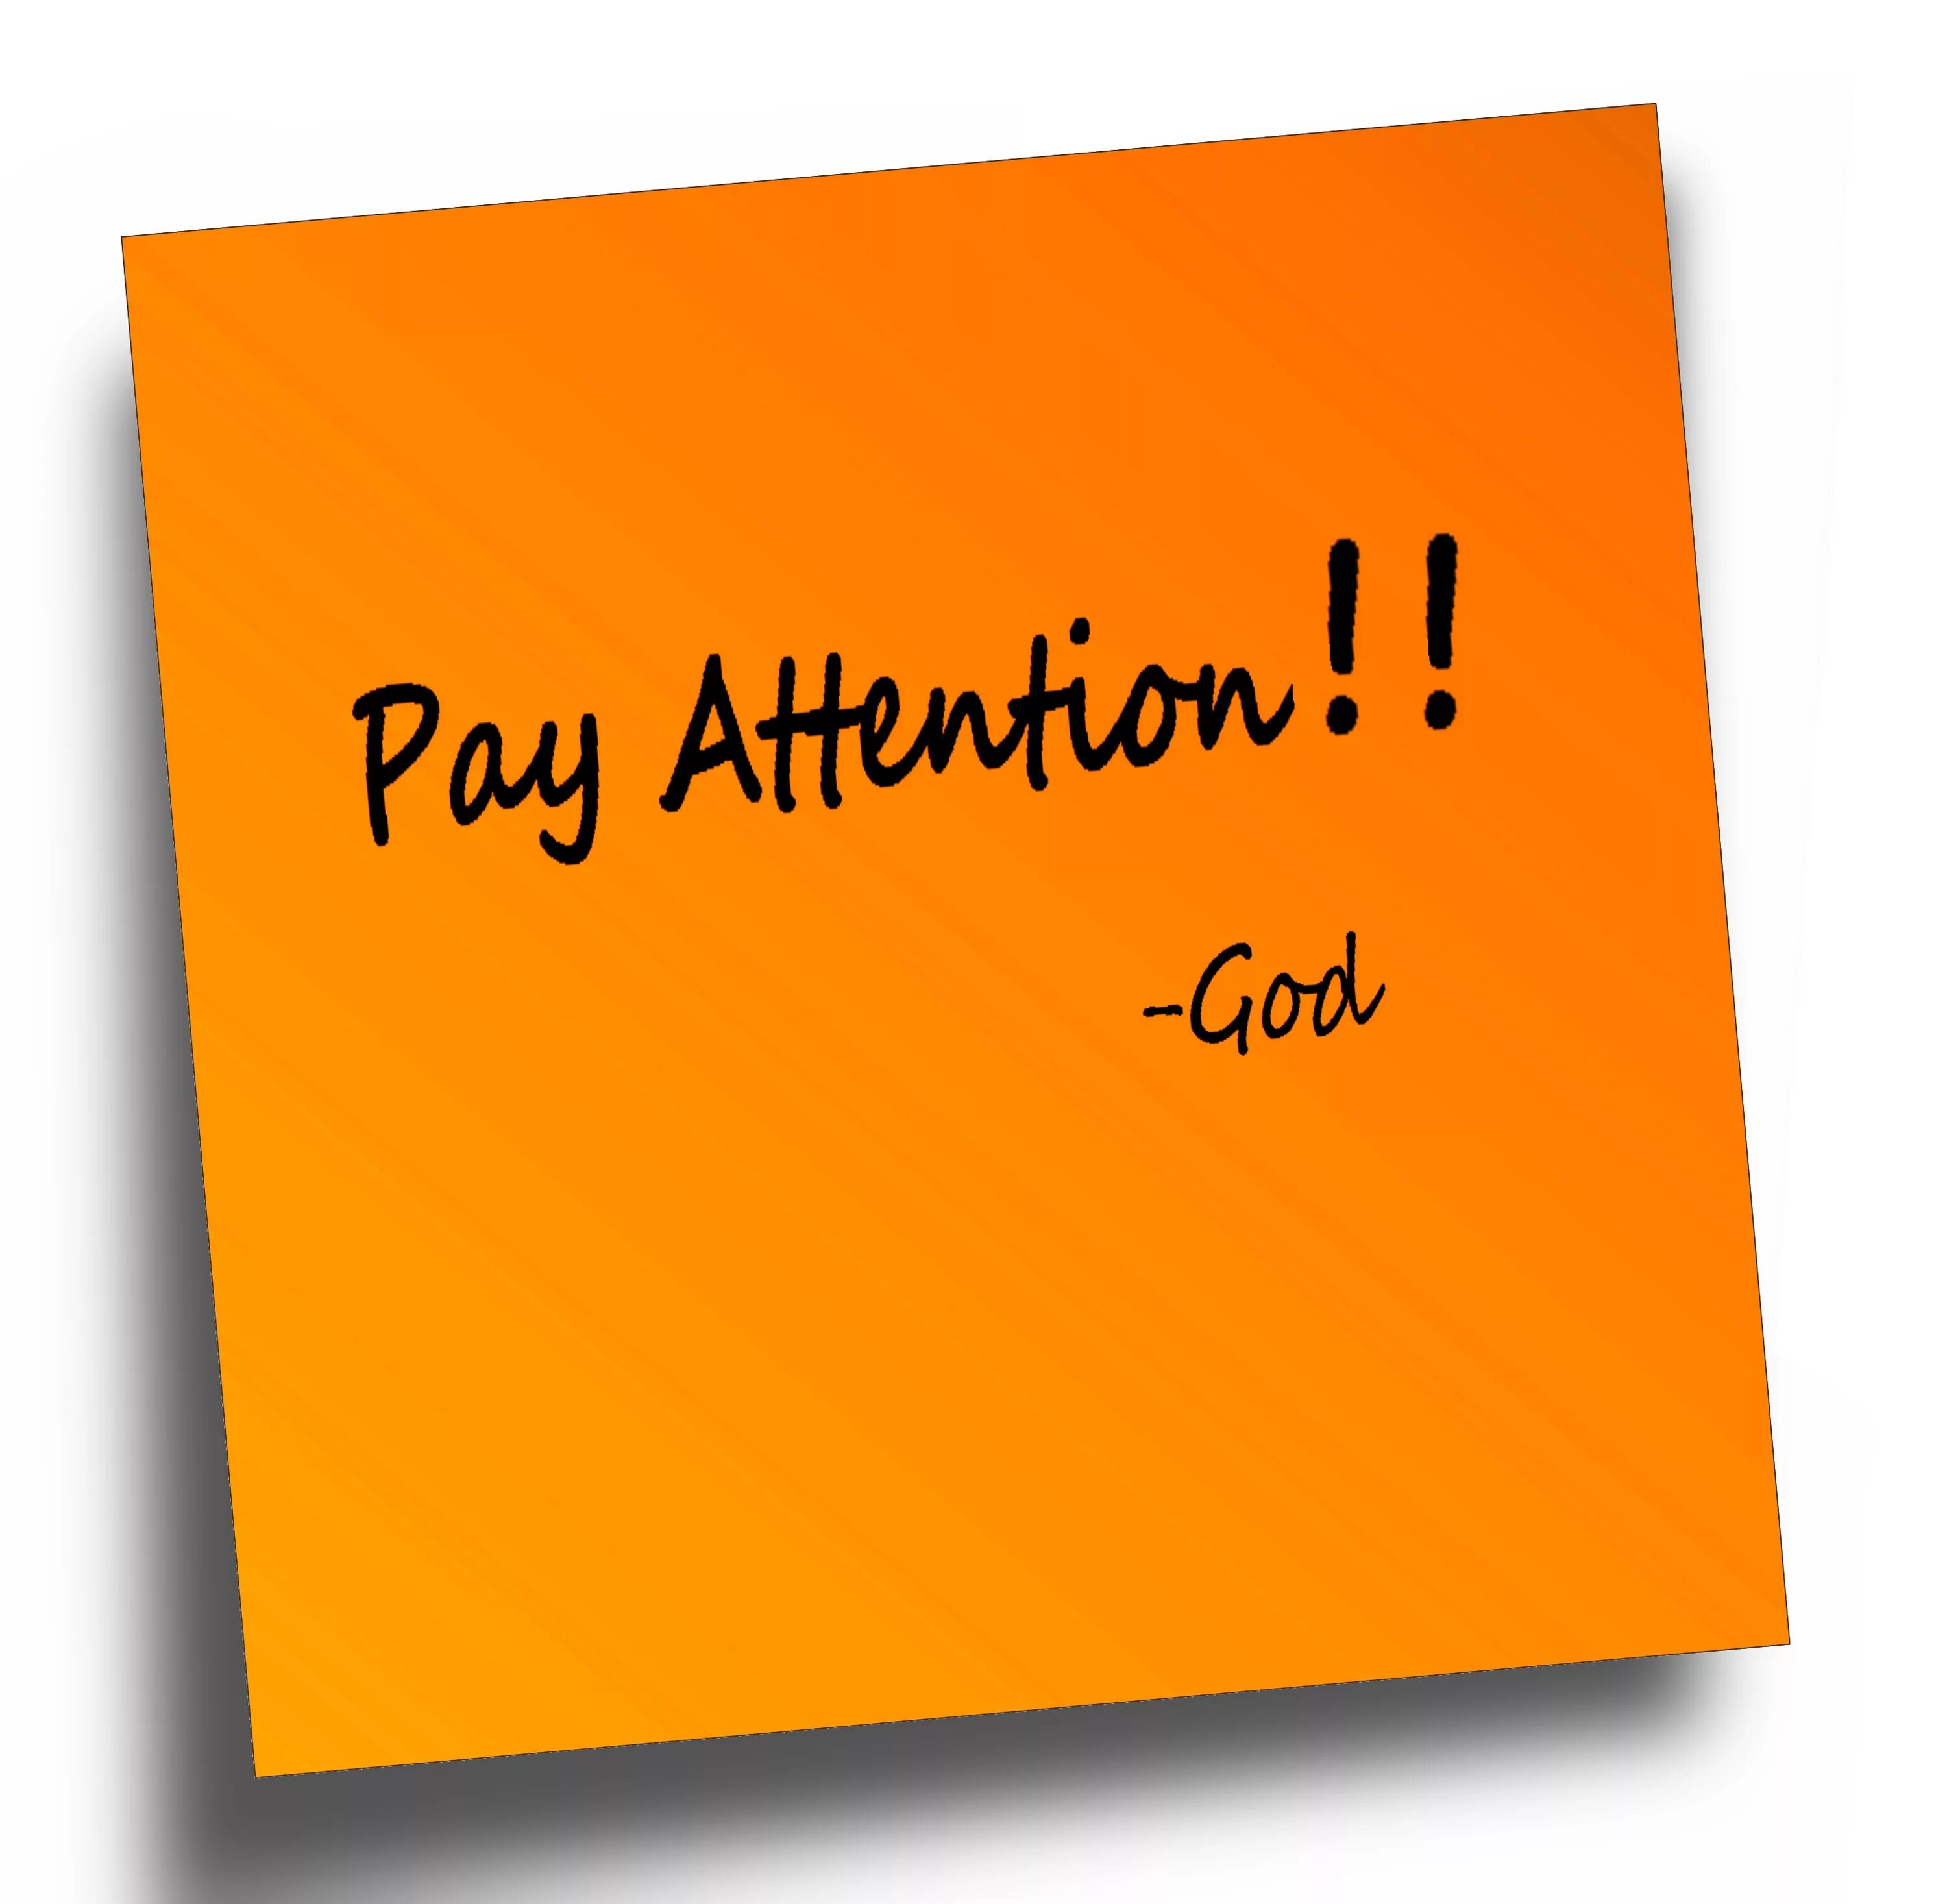 Pay attention. Pay attention картинка. To pay attention to. Paid attention. Pay attention of the many